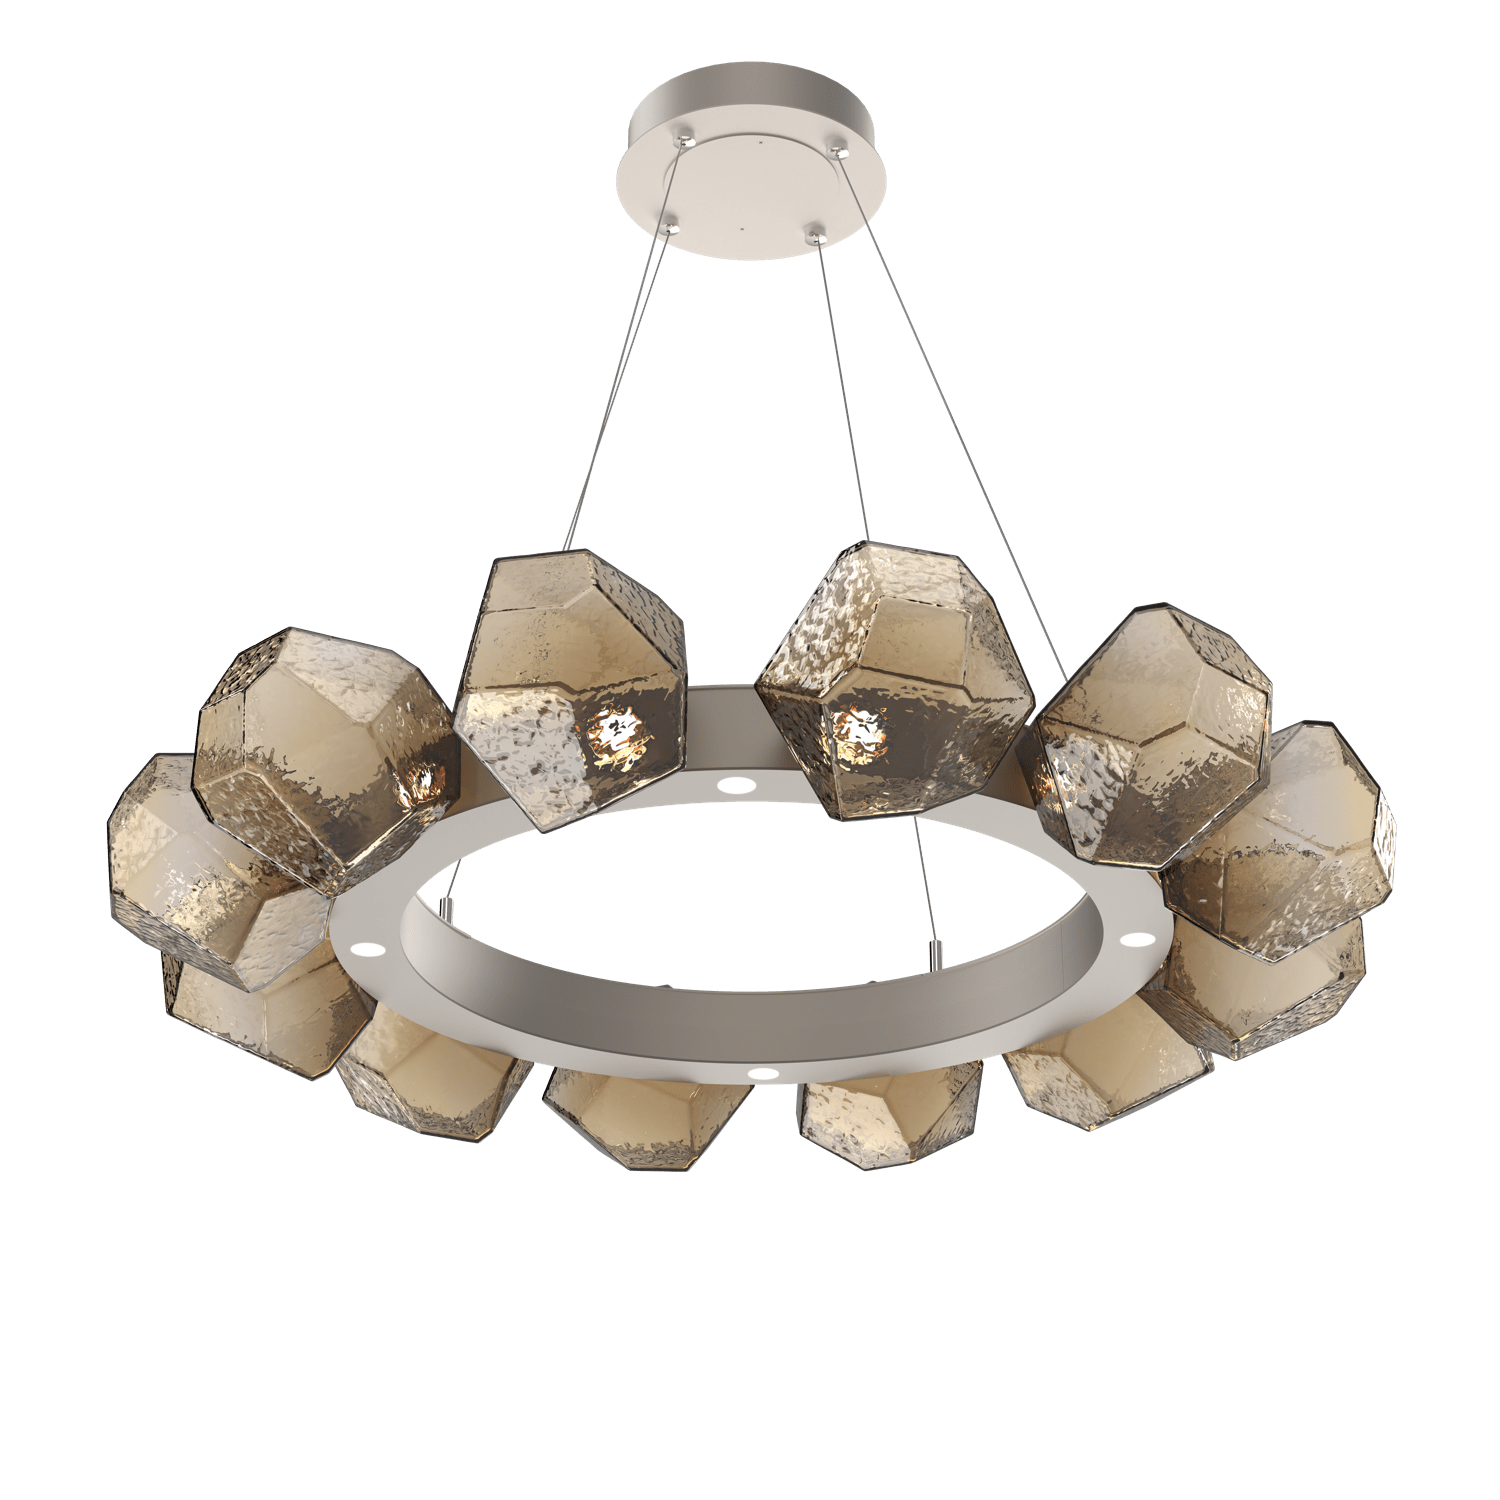 CHB0039-36-BS-B-Hammerton-Studio-Gem-36-inch-radial-ring-chandelier-with-metallic-beige-silver-finish-and-bronze-blown-glass-shades-and-LED-lamping